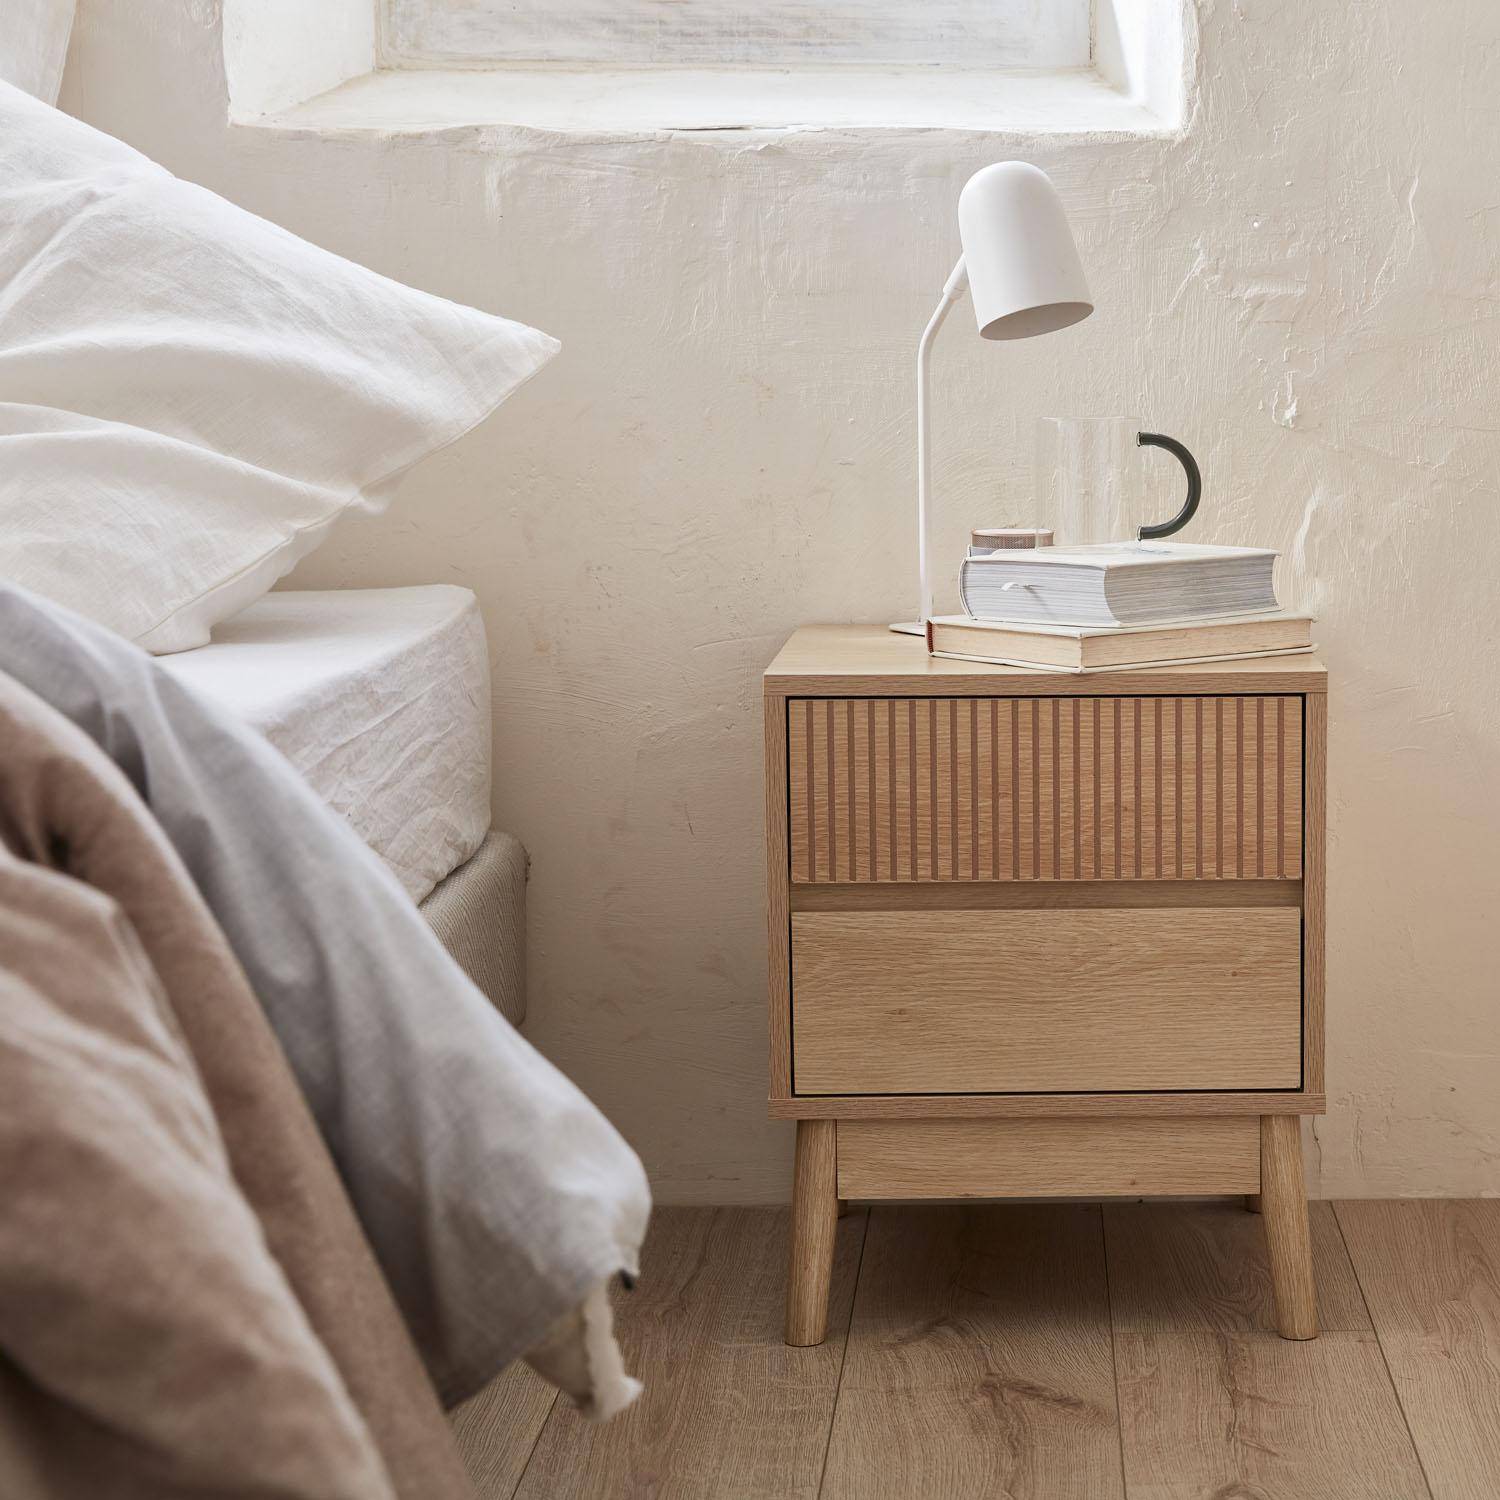 Grooved wooden bedside table with 2 drawers, 40x39x48cm, Linear - Natural Wood colour Photo1